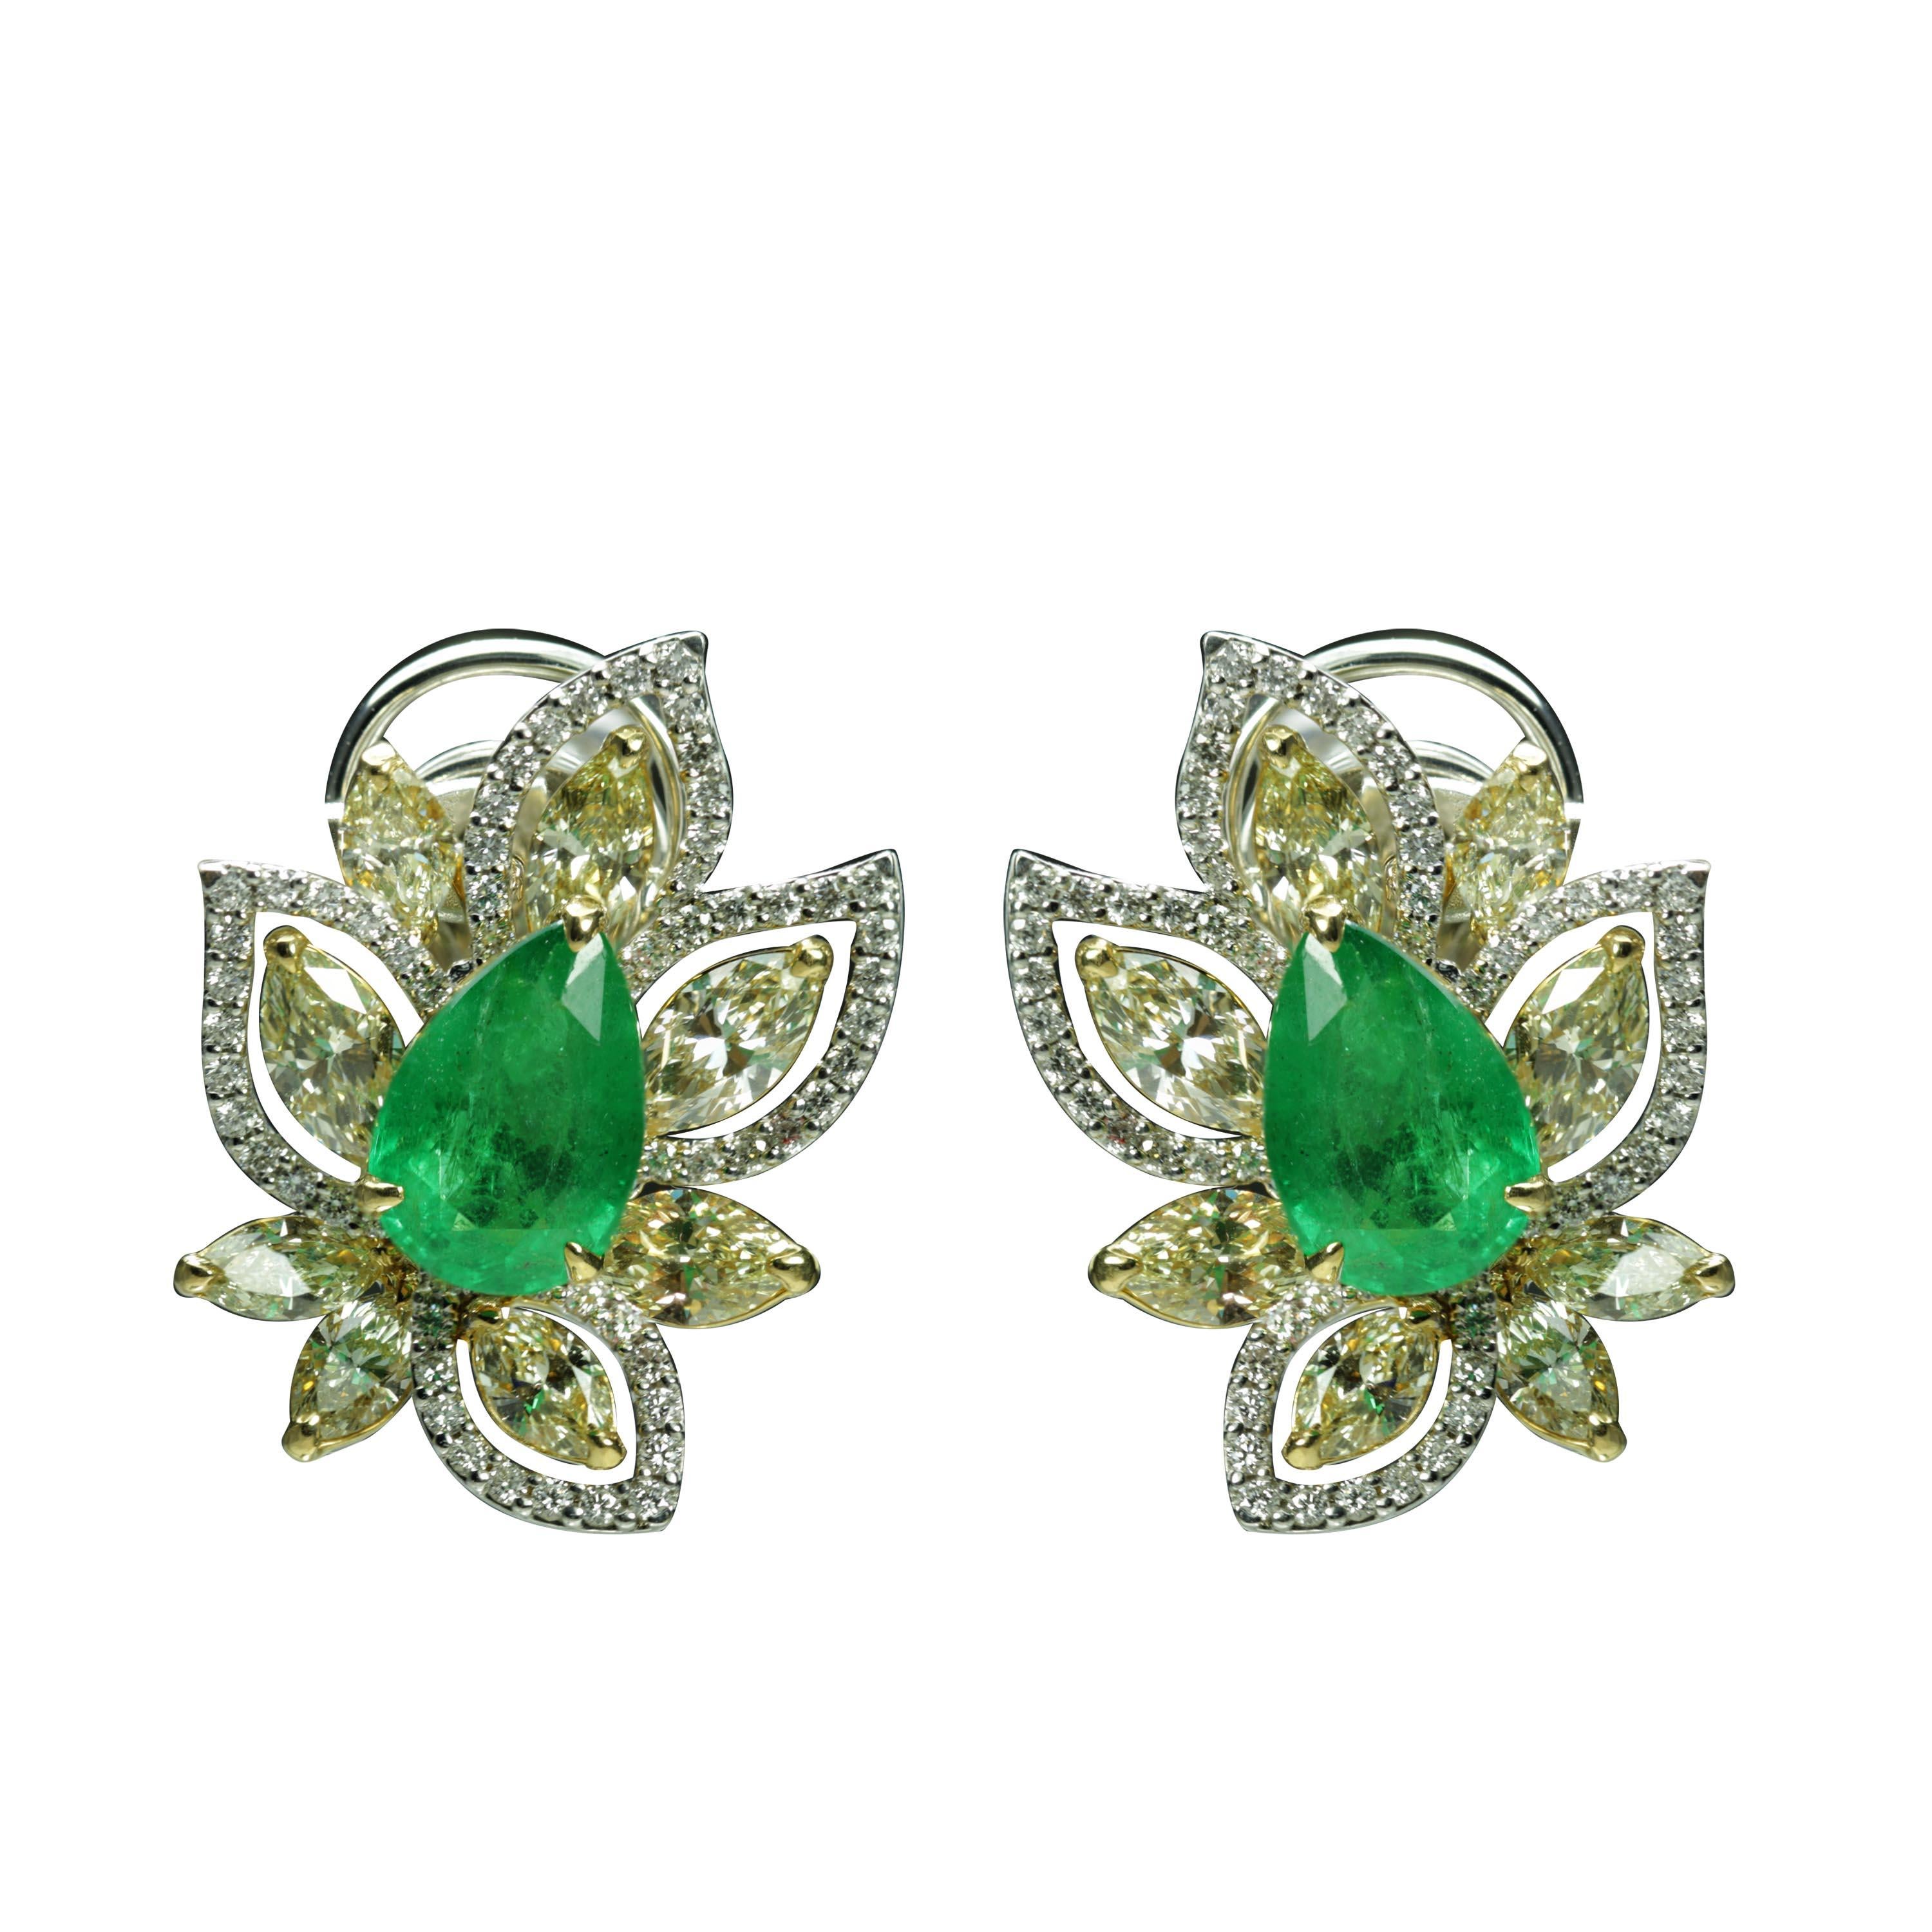 Studio Rêves Diamonds and Emeralds Floral Stud Earrings in 18 Karat Gold In New Condition For Sale In Mumbai, Maharashtra